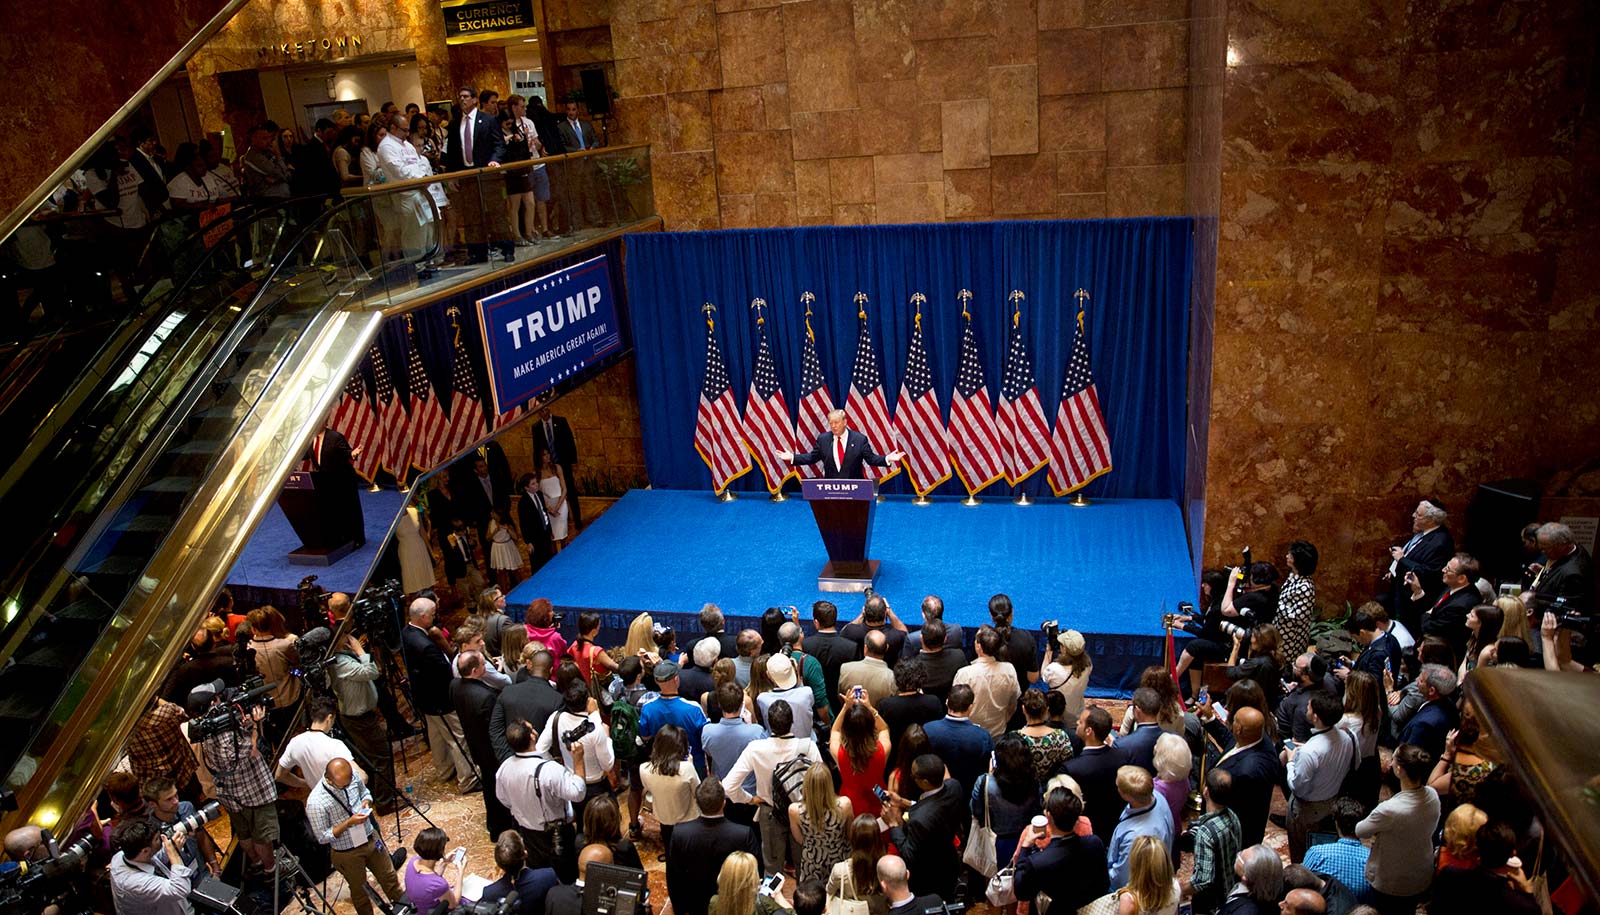 Donald Trump speaks on a stage in the atrium of Trump Tower as he announces he is running for the US presidency on 16 June 2015